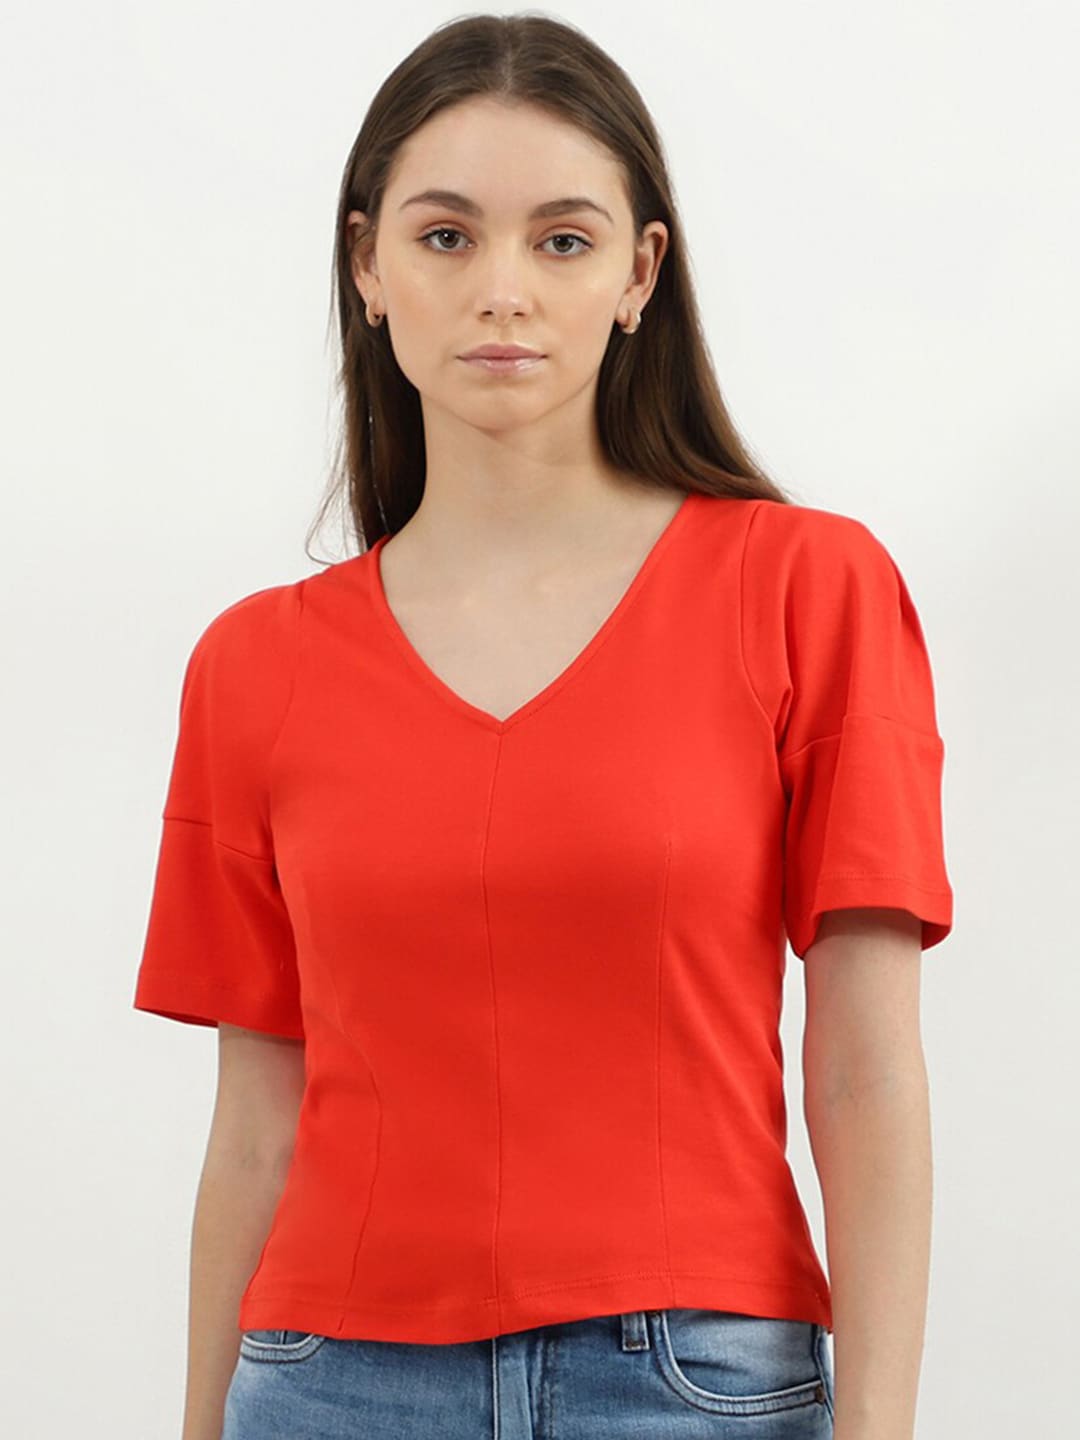 United Colors of Benetton Woman Solid V-Neck Crop Top Price in India